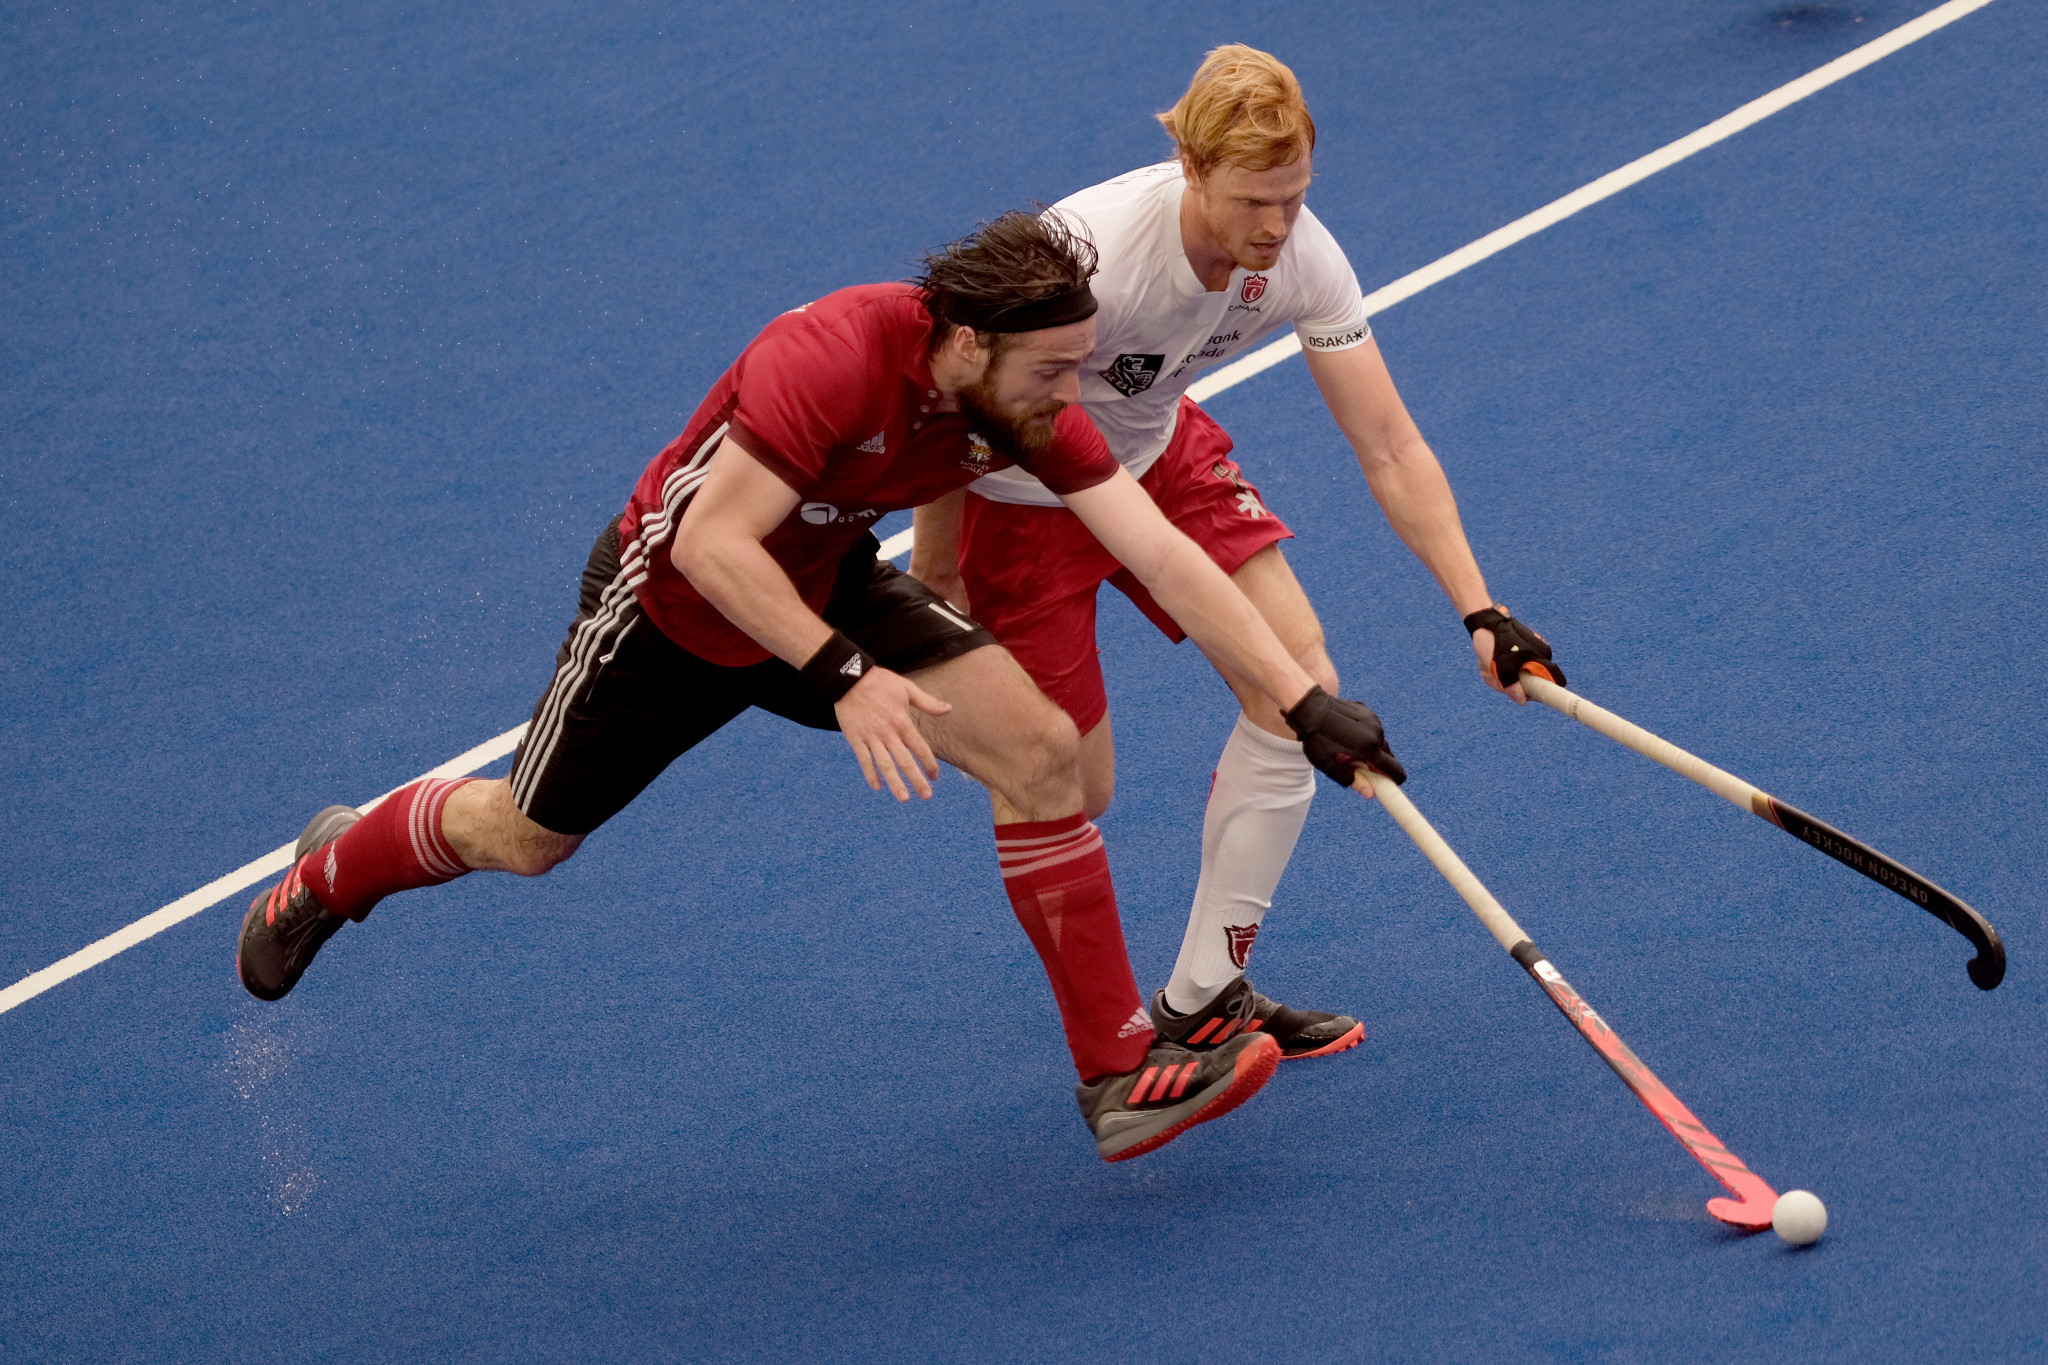 Wales defeated Canada on the opening day of the FIH Series Finals in Kuala Lumpur ©Getty Images